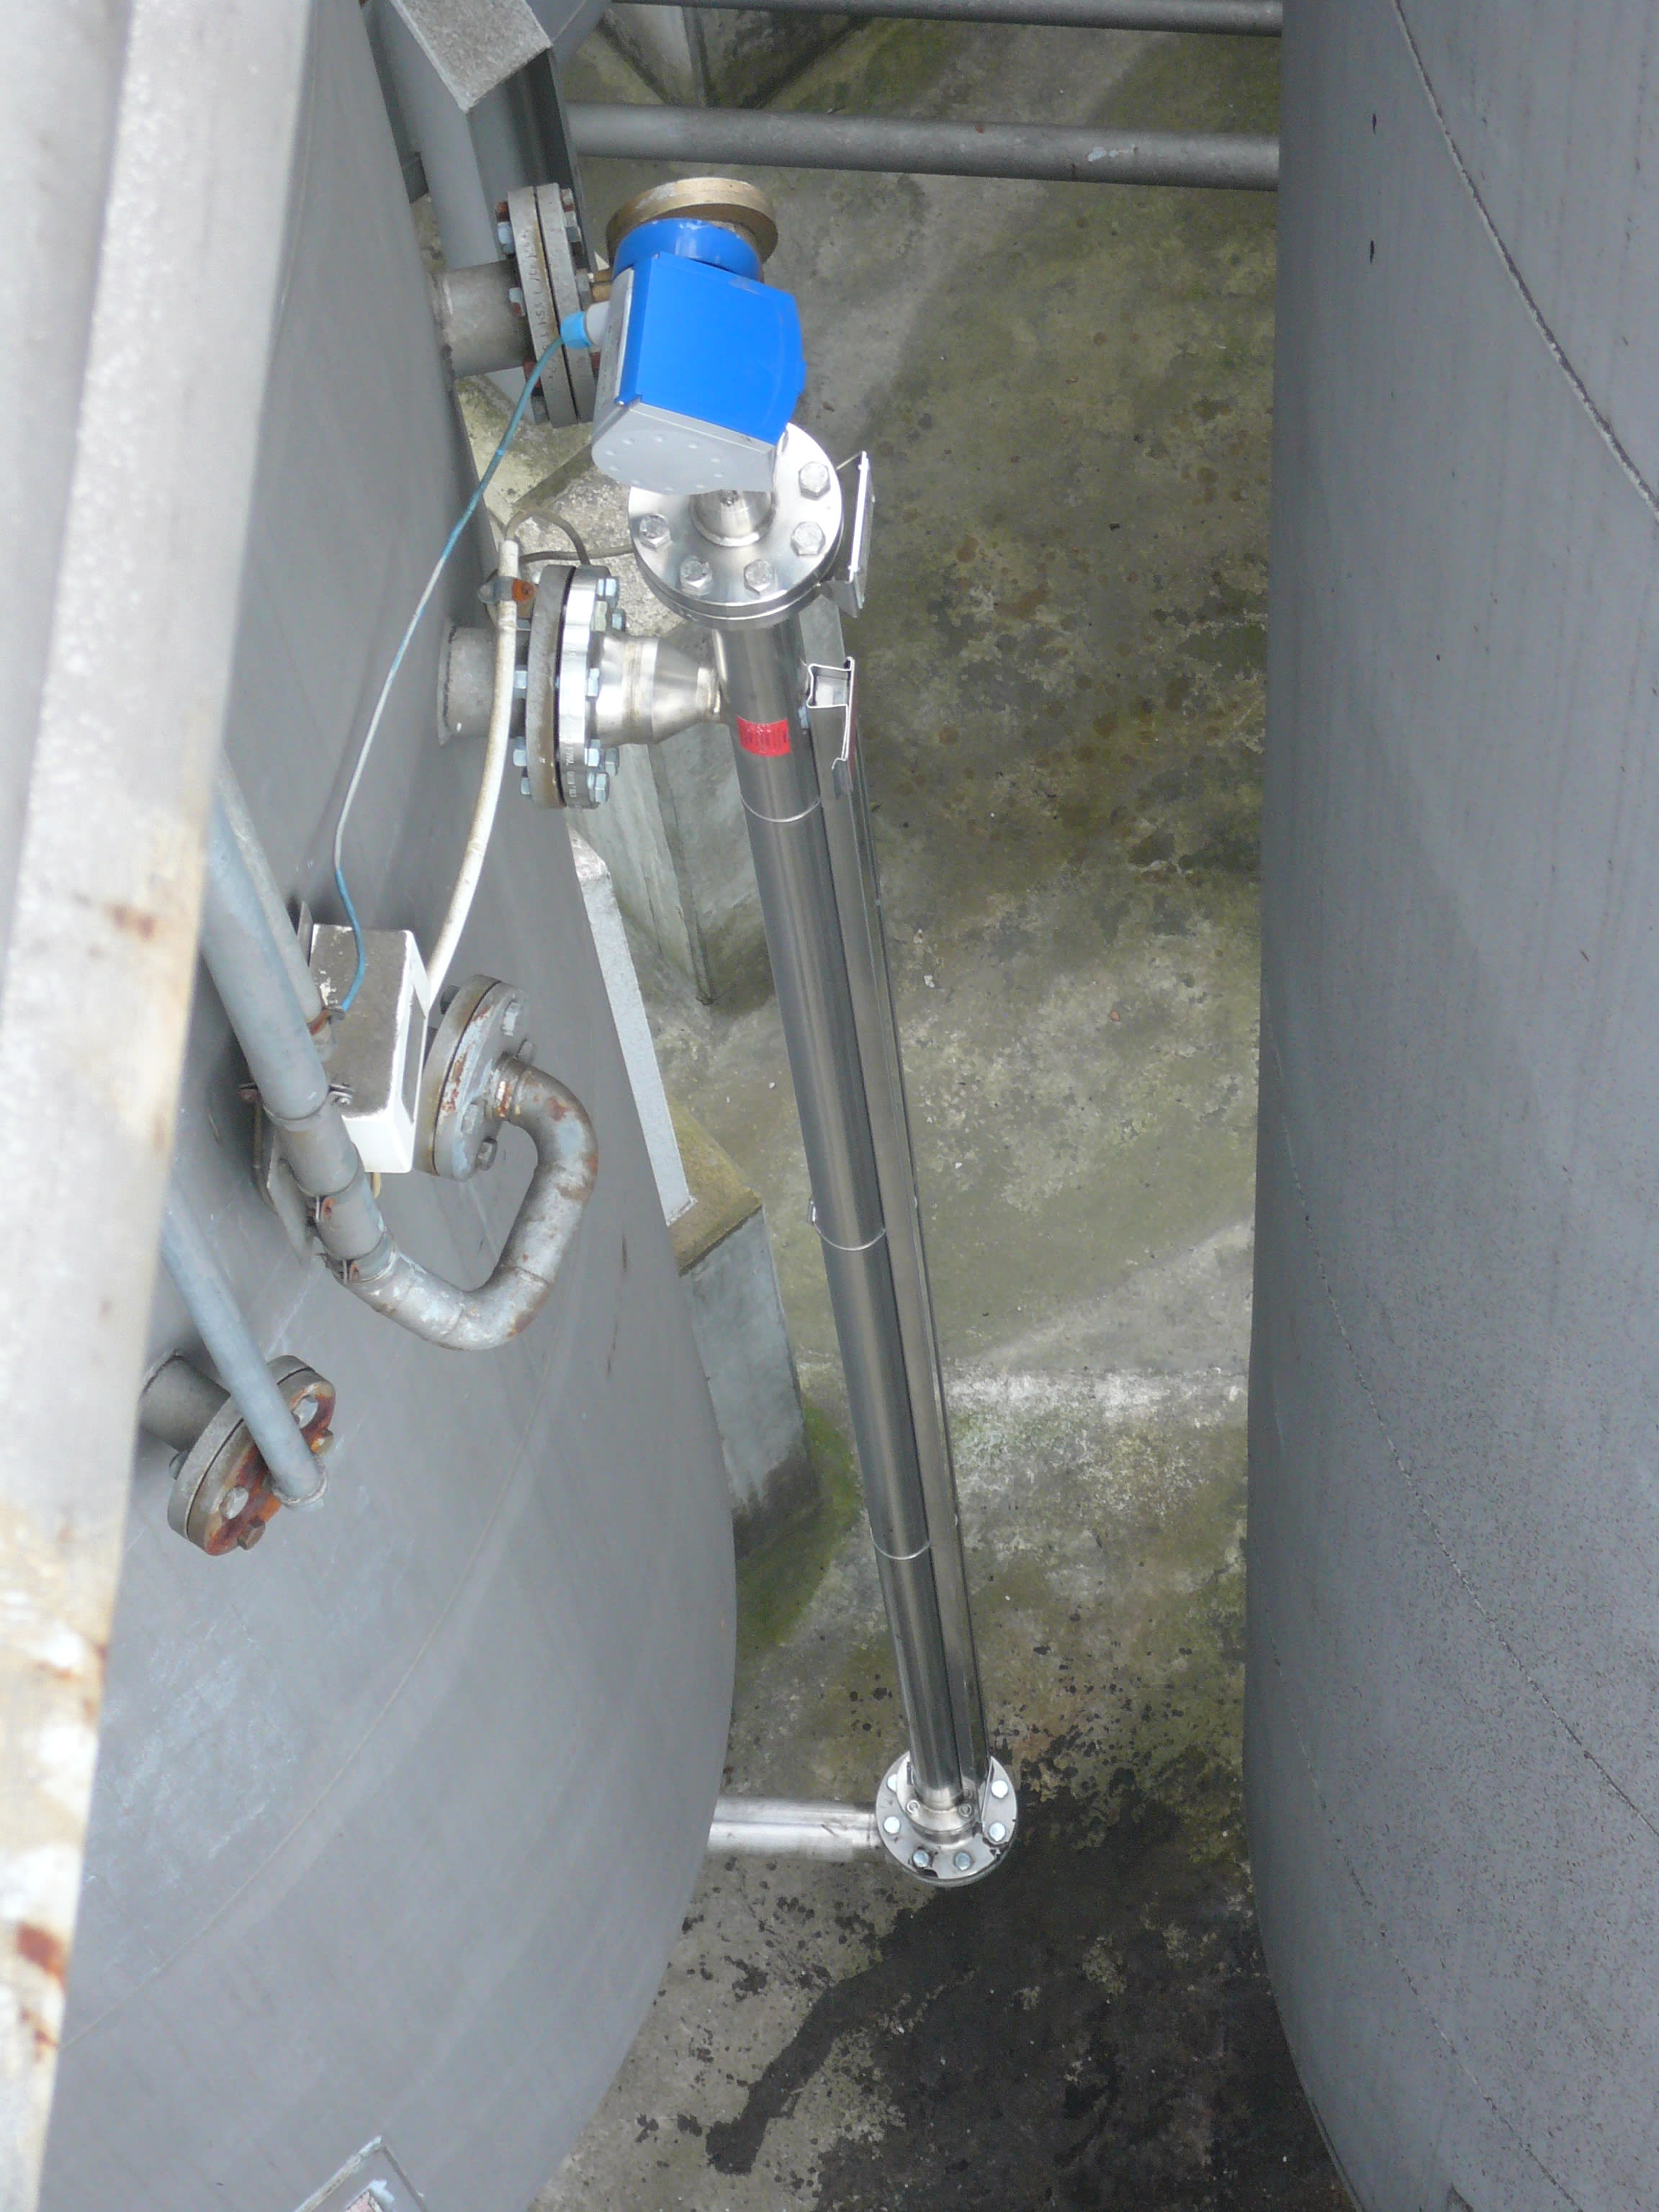 Bypass measurement on a 2-chamber tank